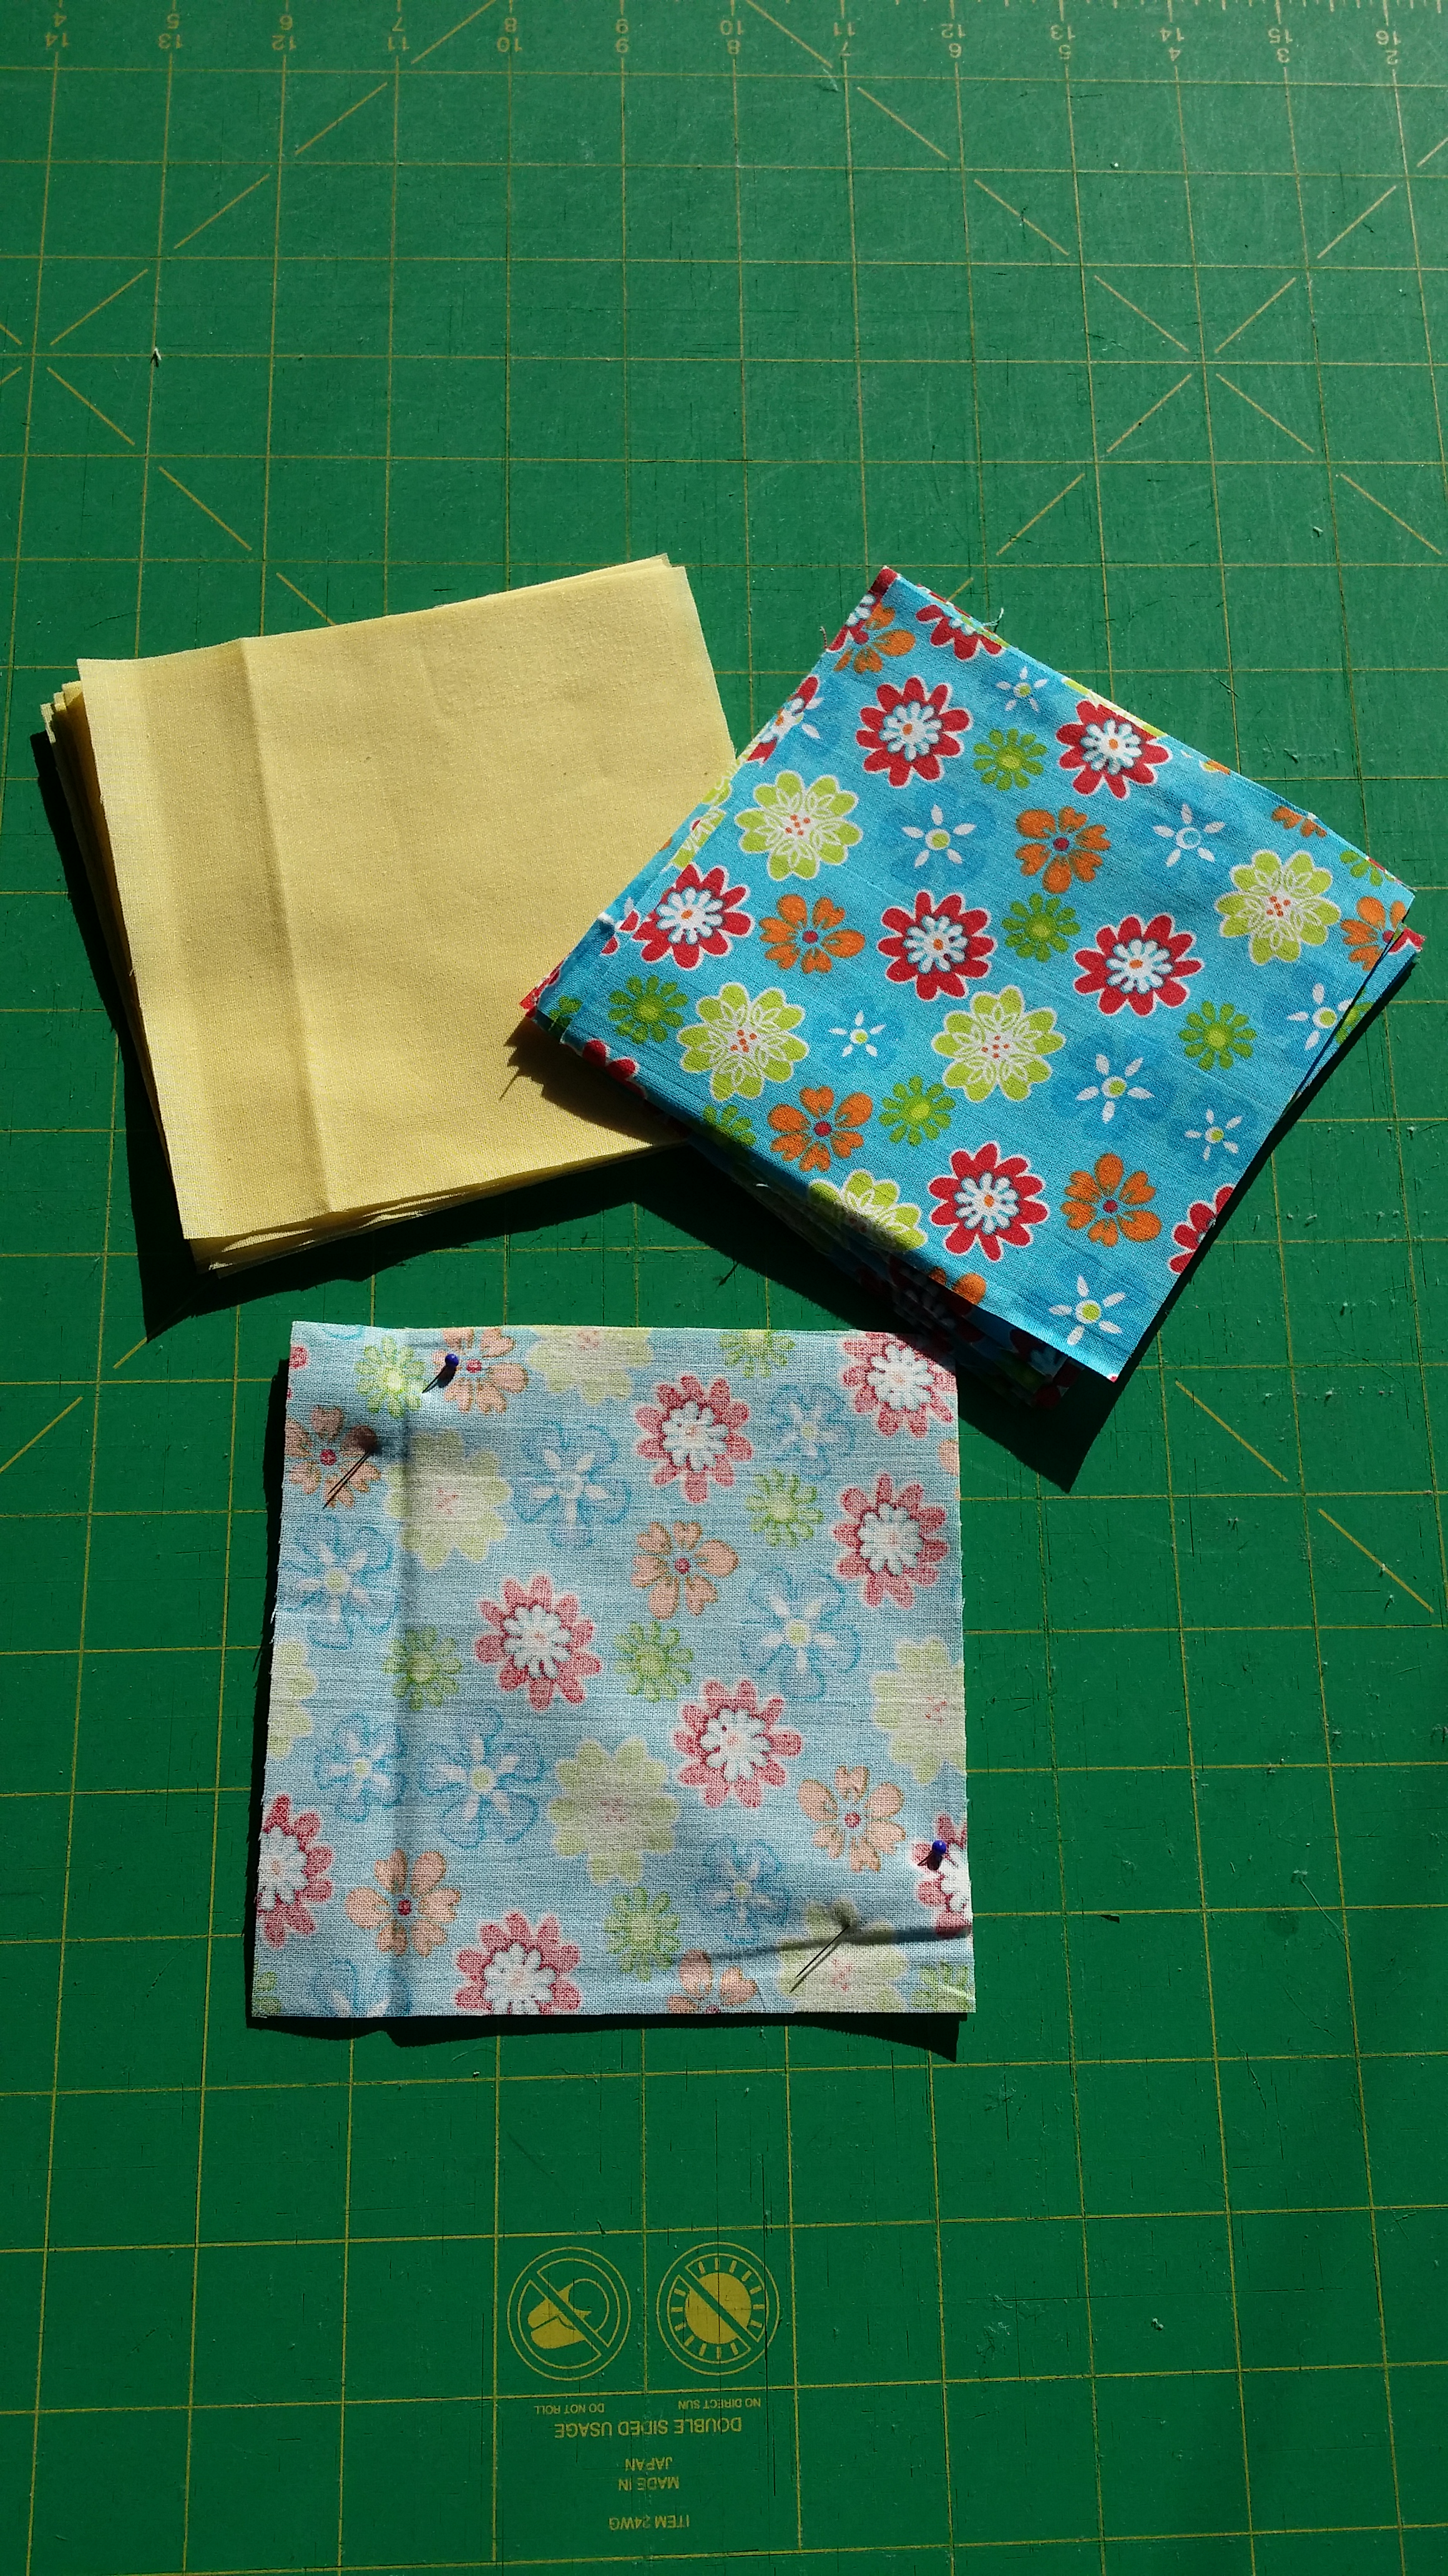 Pinned squares